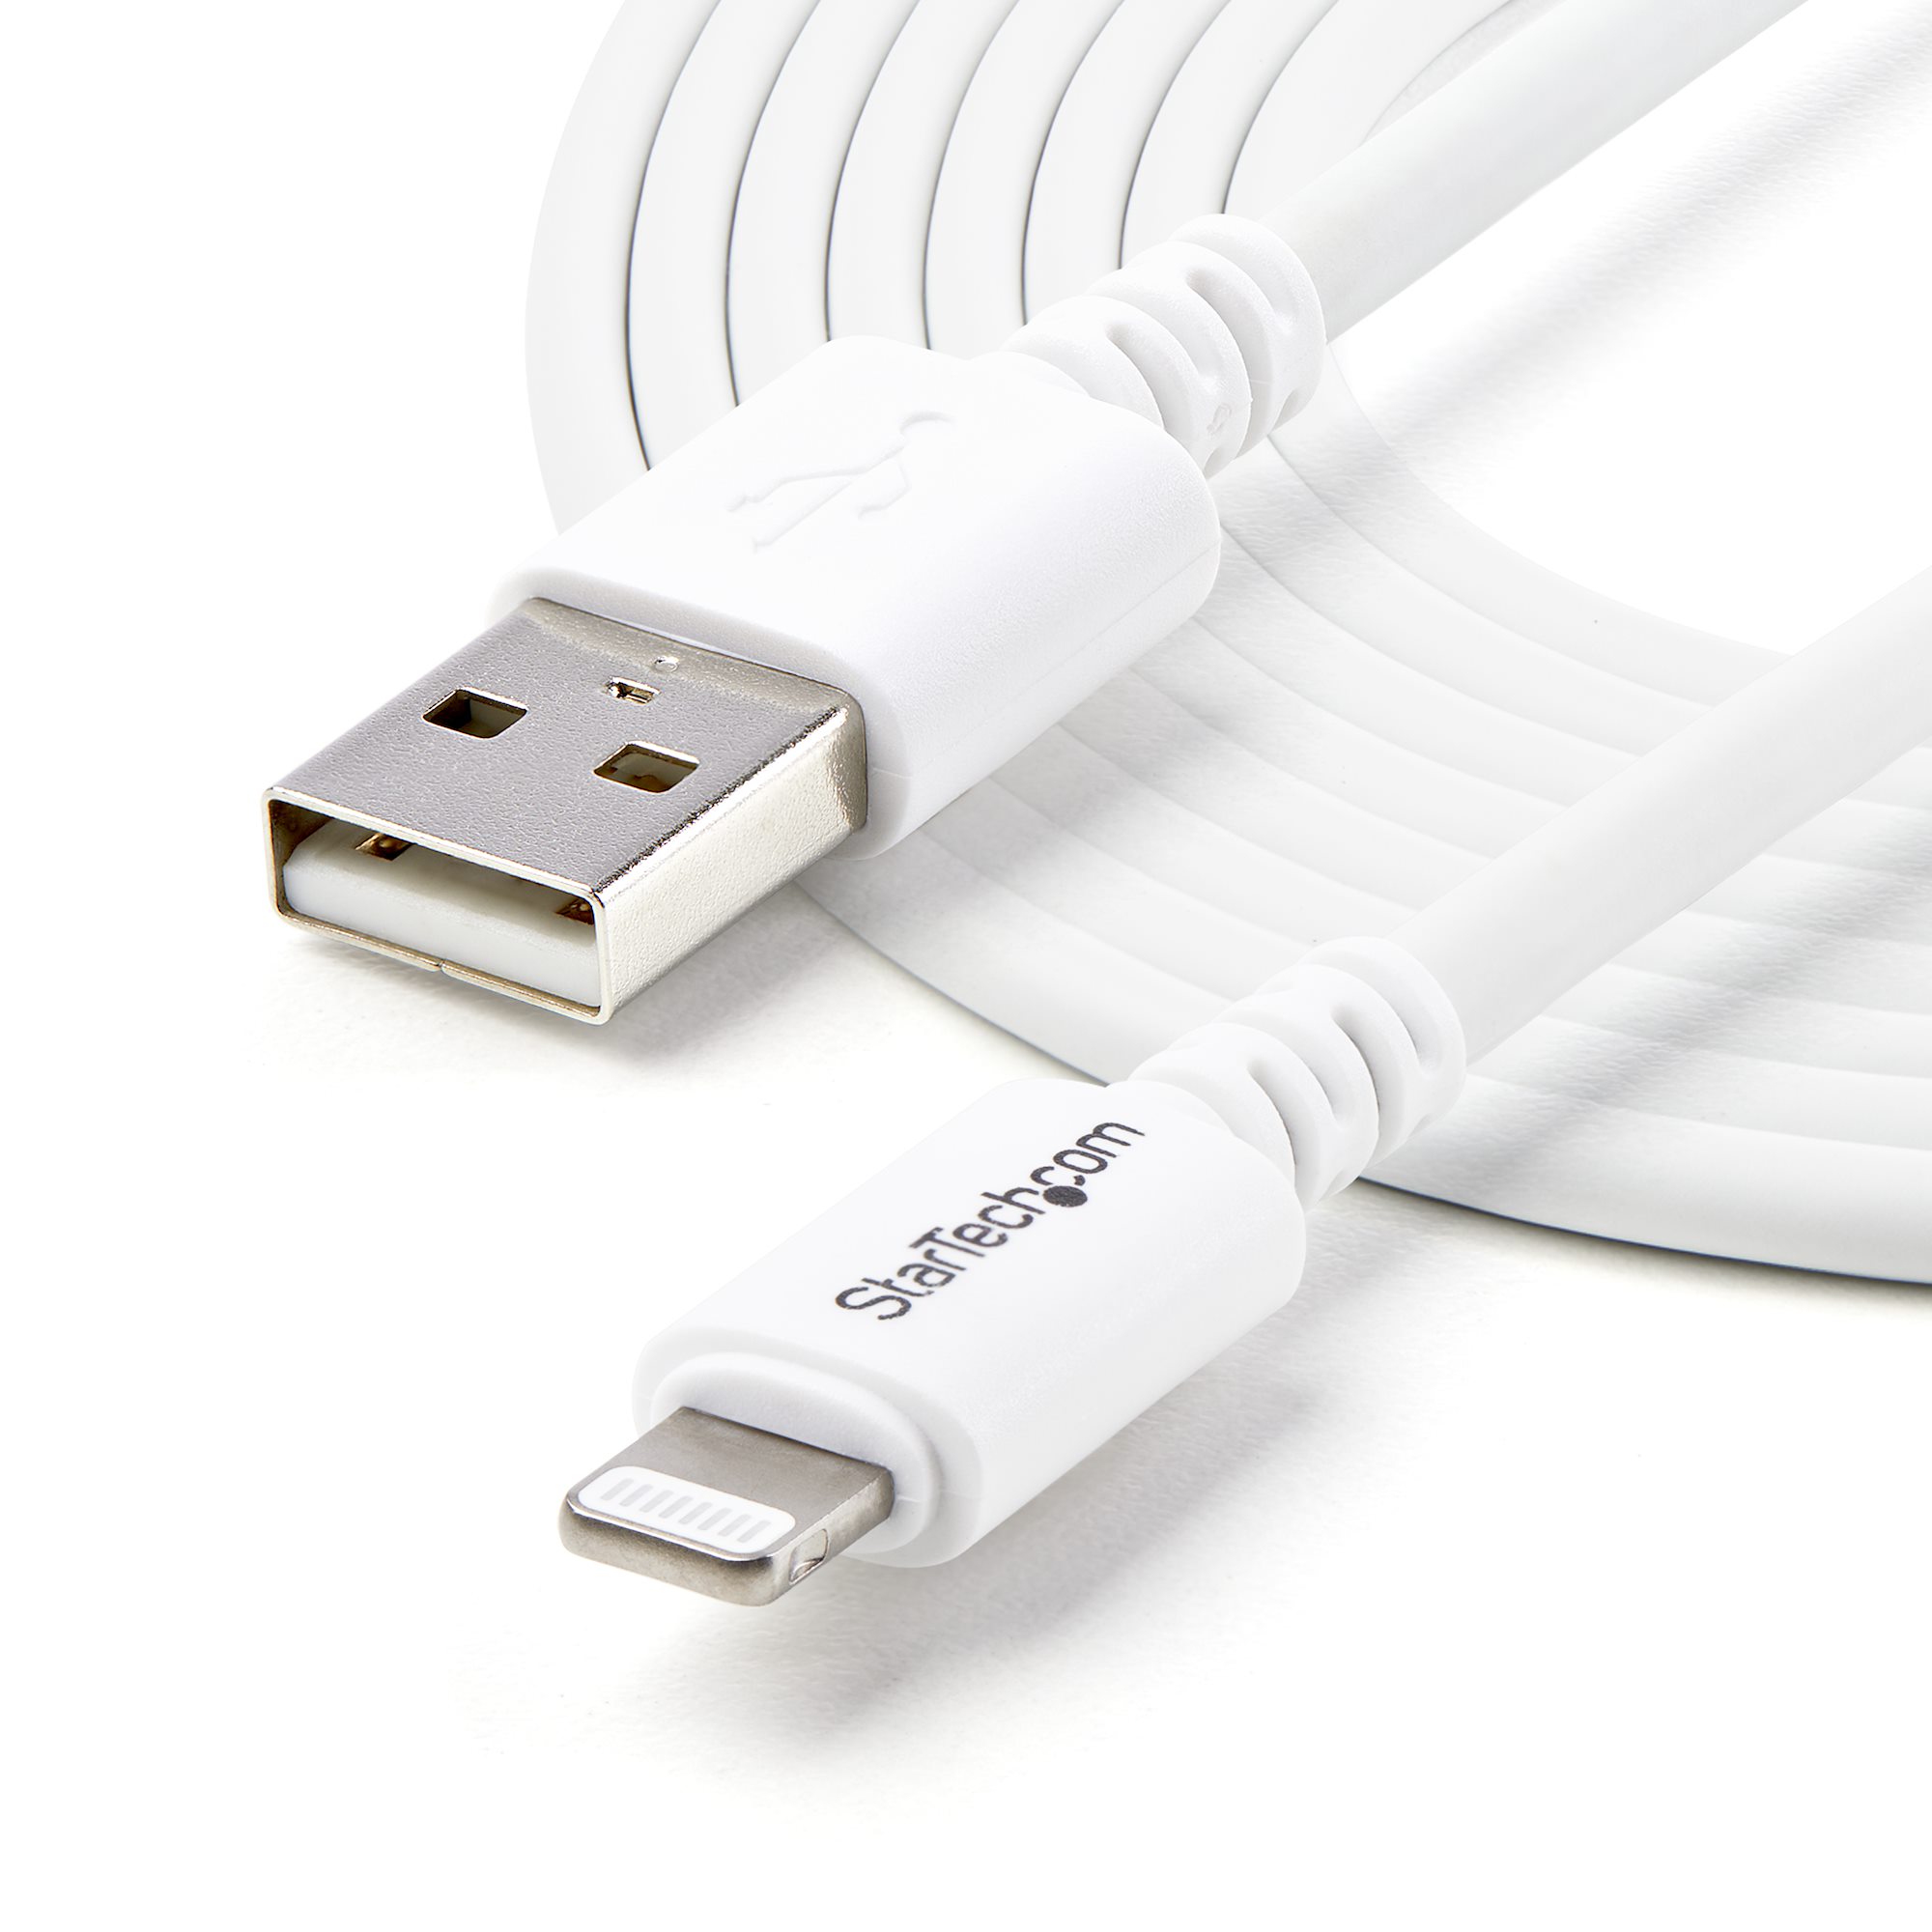 WHITE 6FT LONG USB CABLE DATA SYNC CORD CHARGING POWER WIRE for iPAD iPOD 